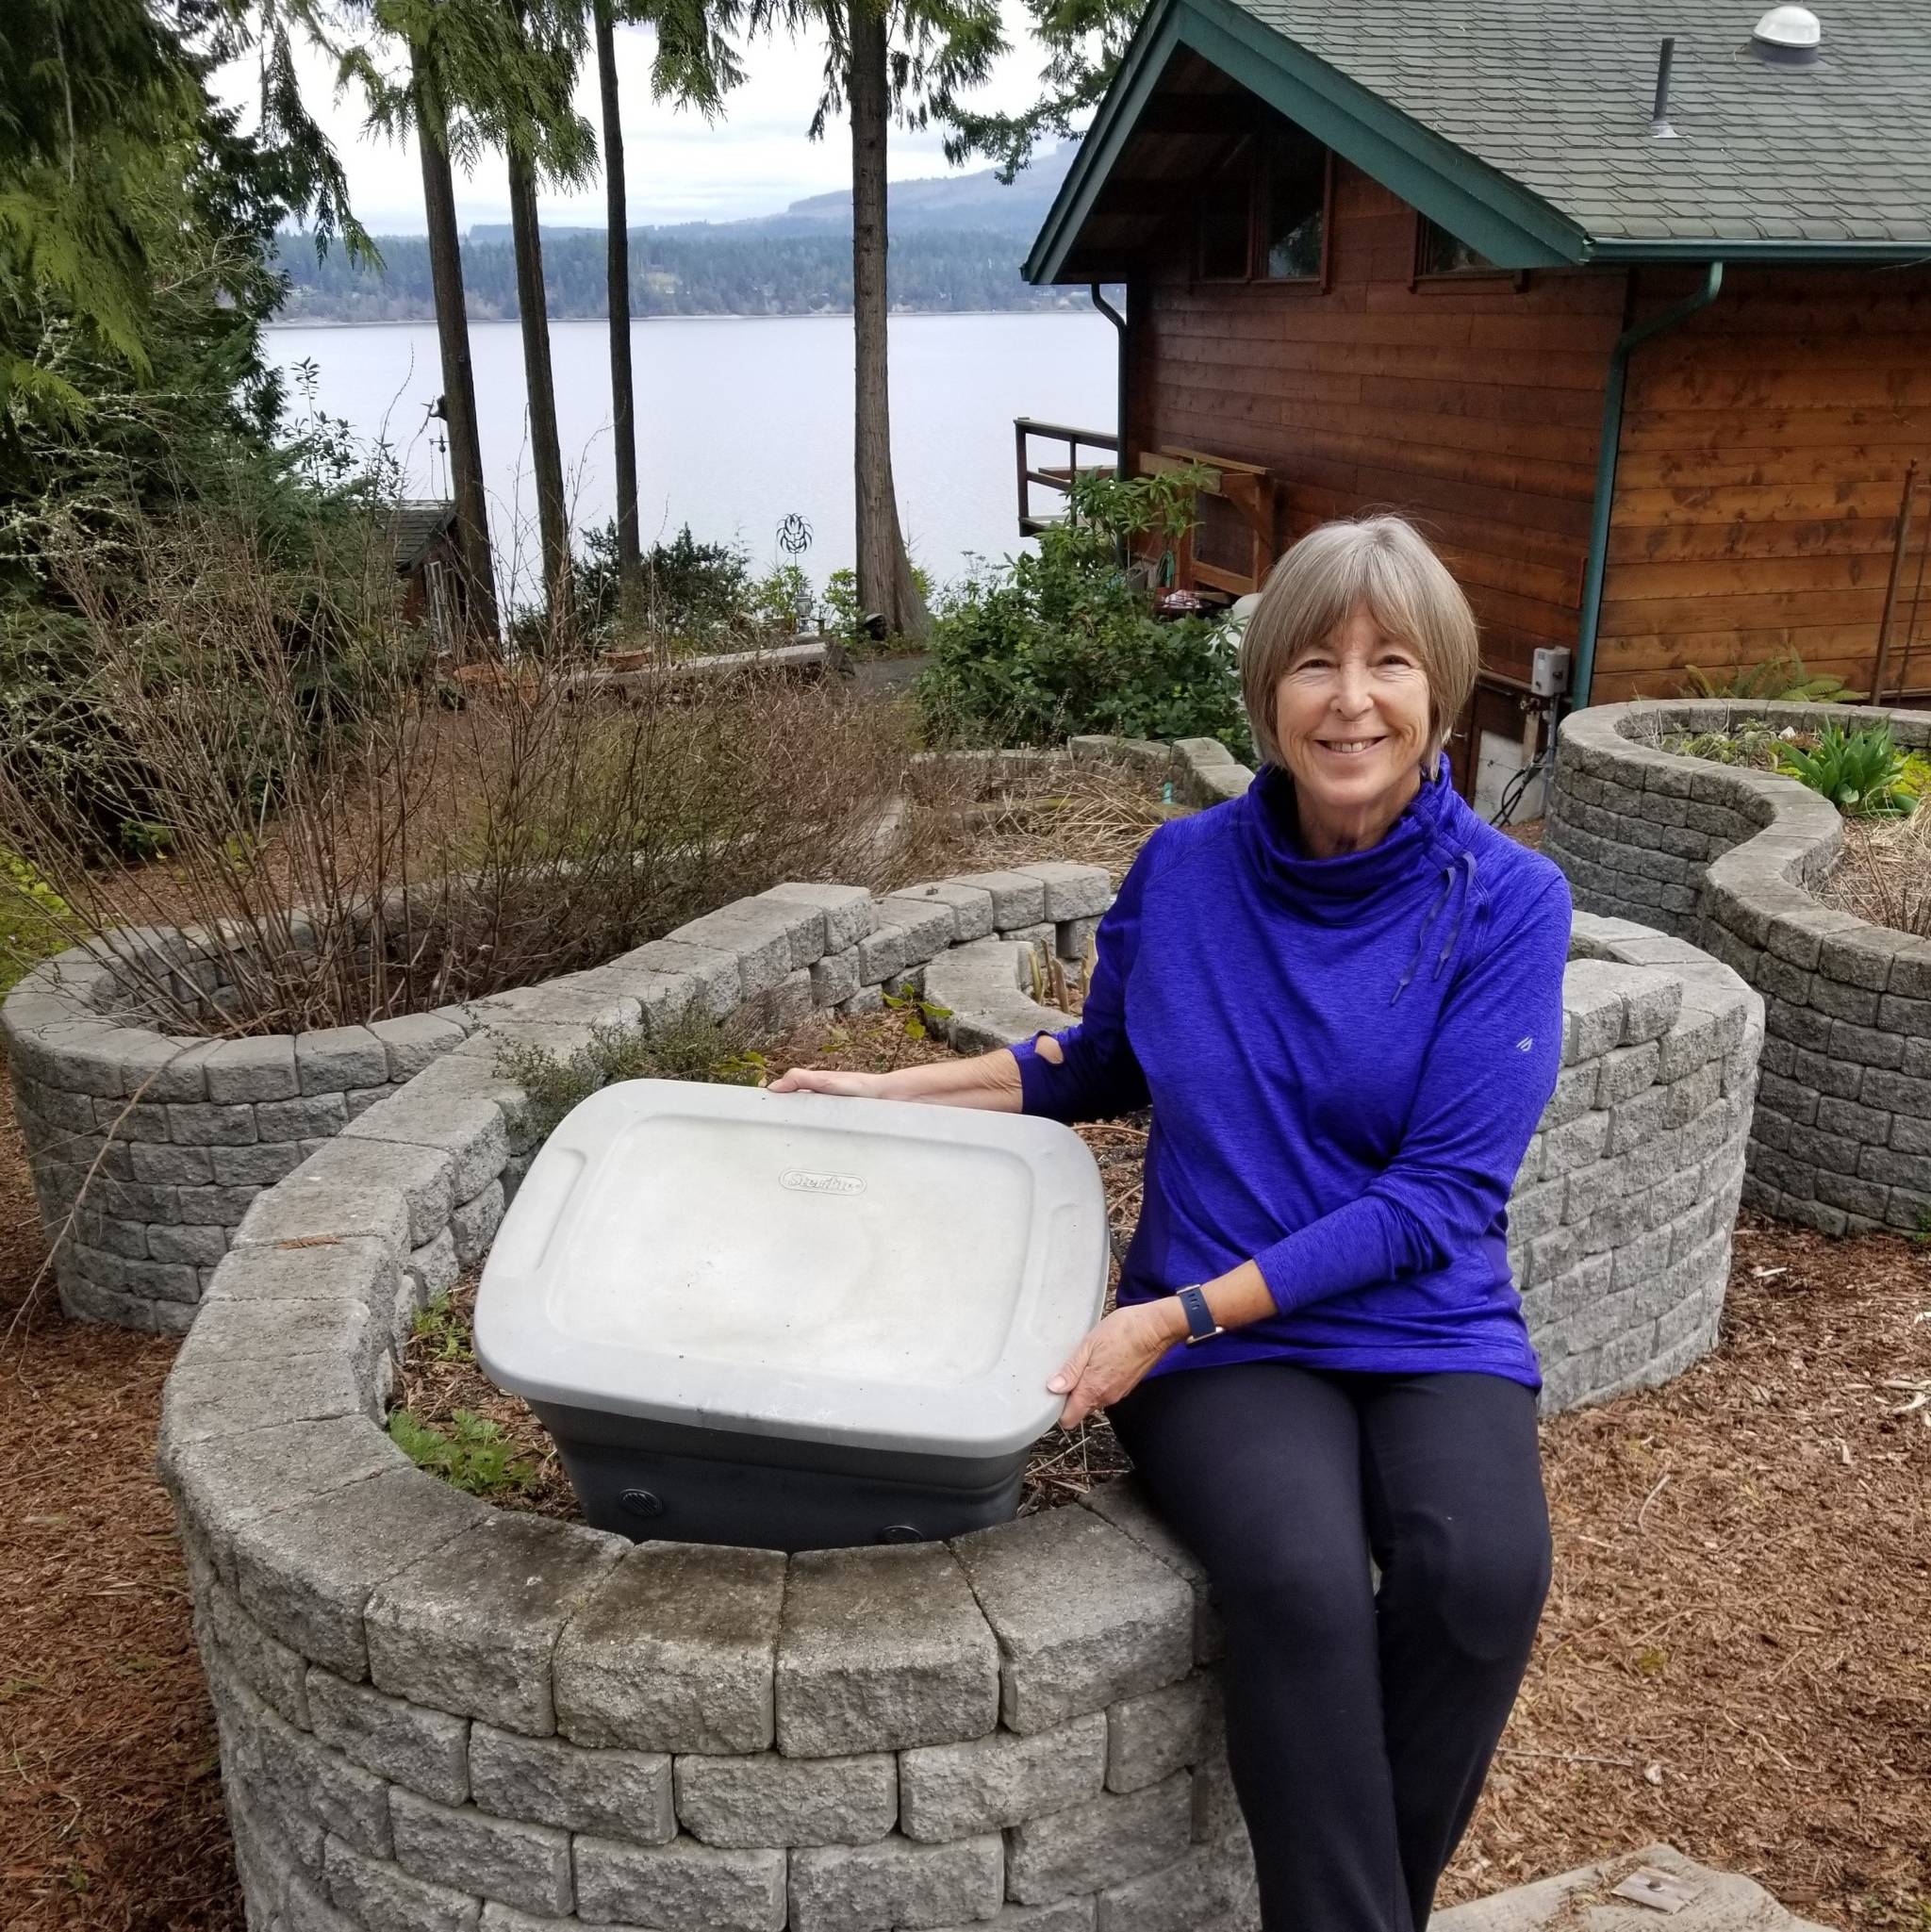 Master Gardener Judy Mann, pictured here with her worm bin, has been enjoying the vermicompost her worms have produced for more than 10 years. She offers a “Worm Composting” presentation on April 23. Photo courtesy of Judy Mann